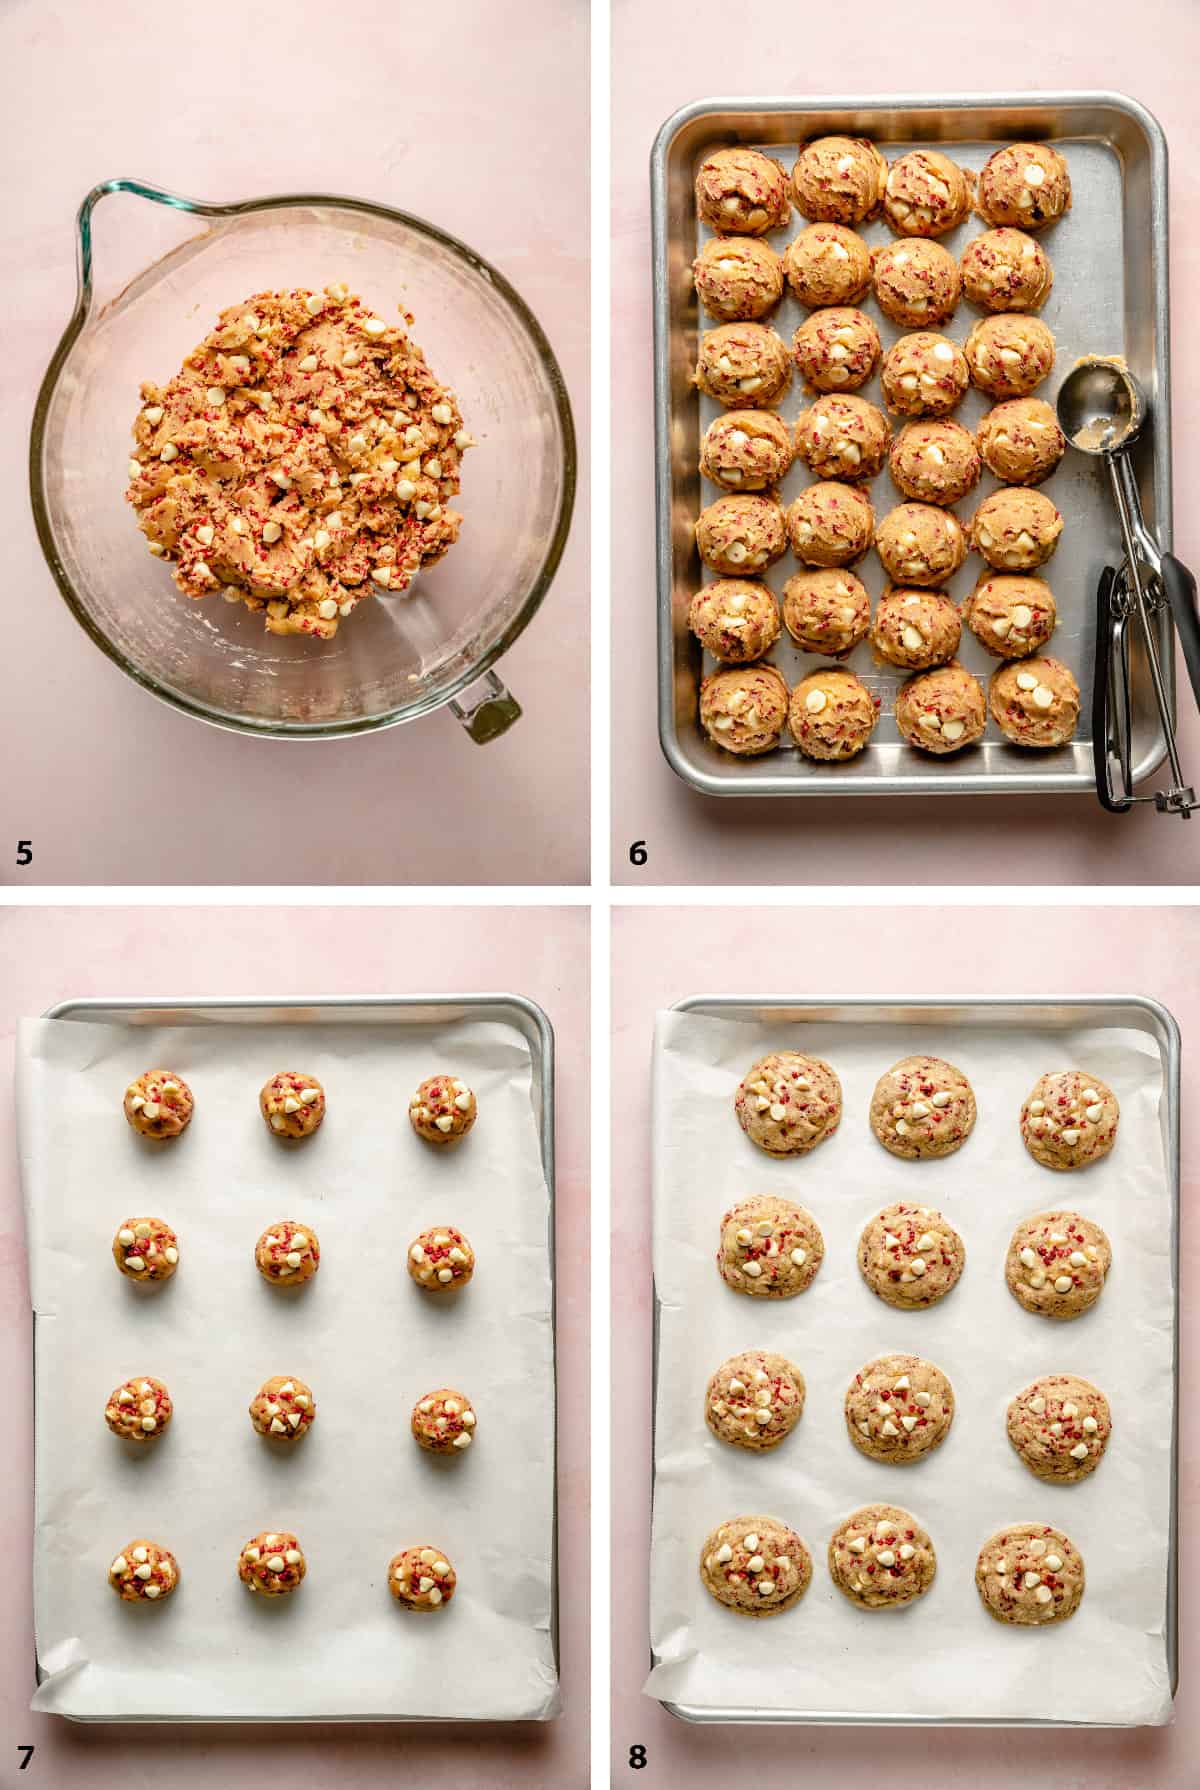 Process of finishing the cookie dough, scooping, before and after baking.